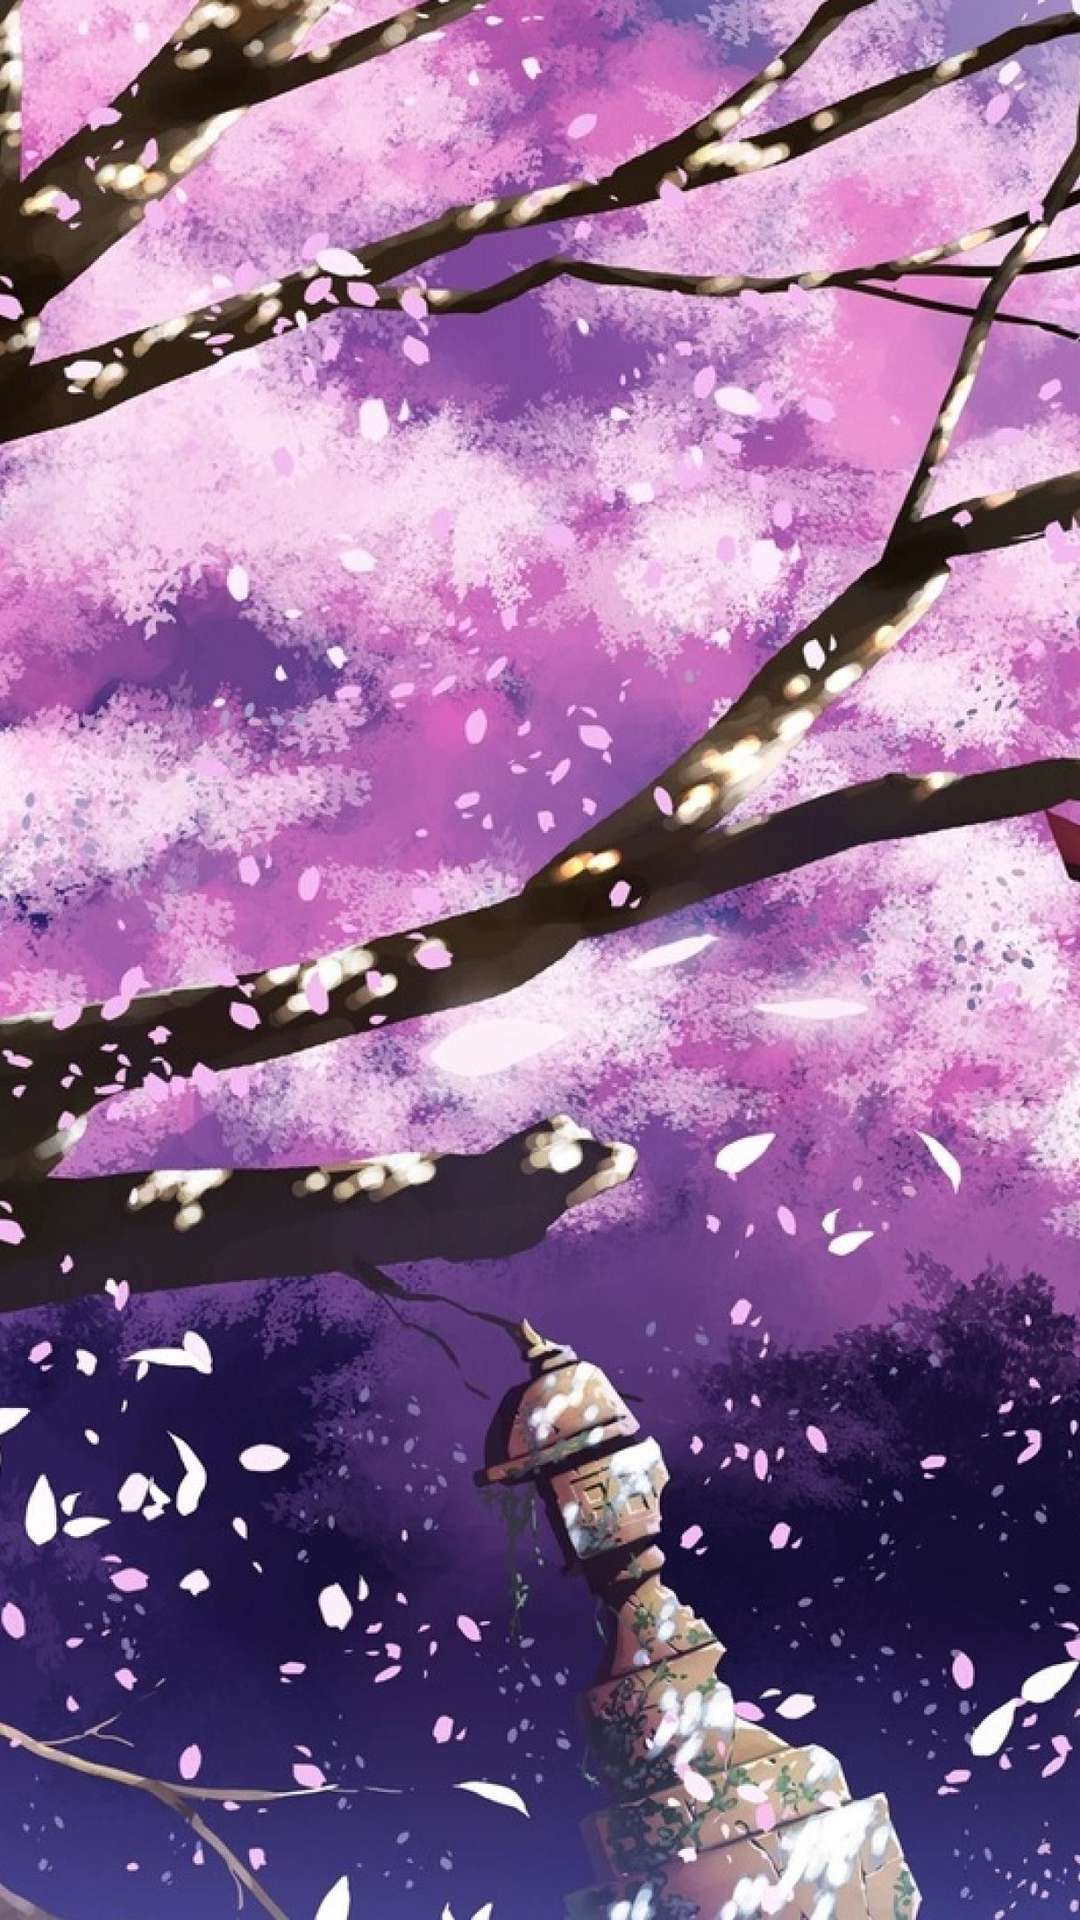 31+ Anime Cherry Blossom Wallpapers for iPhone and Android by Heidi Simmons